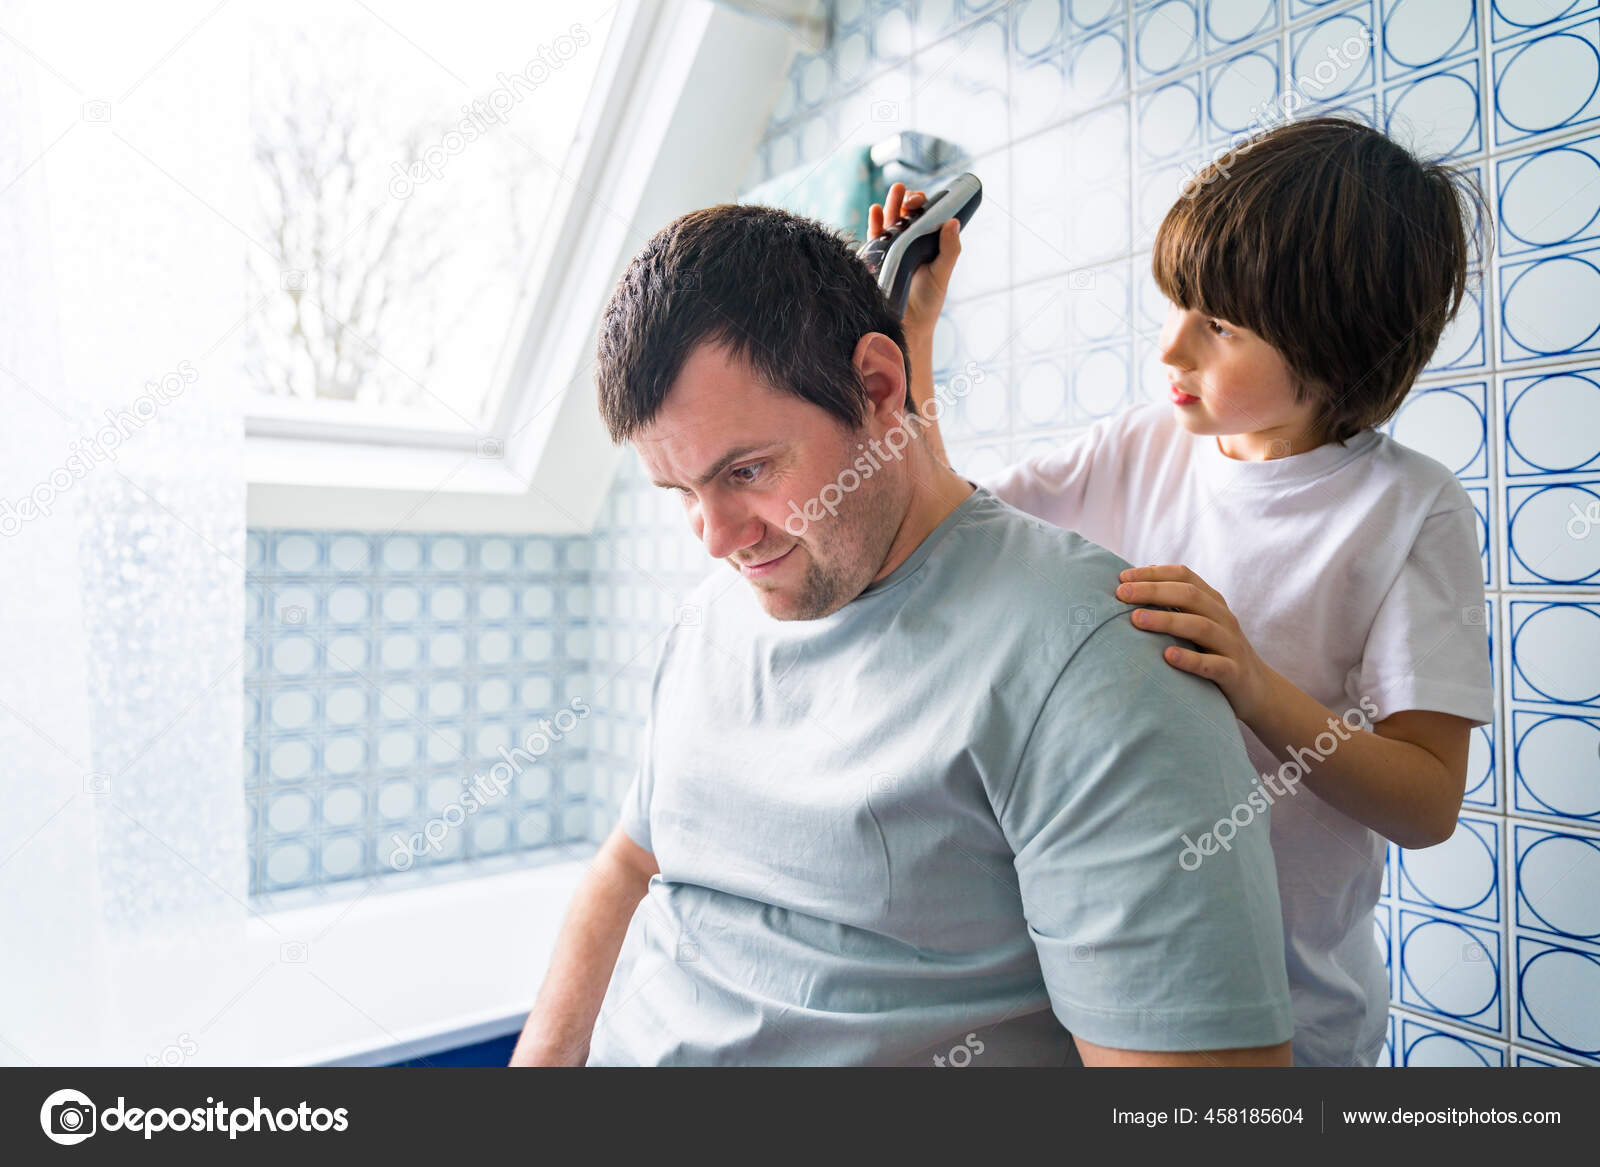 What Happened to the Dad Who Cut Daughter's Hair? - FatherResource